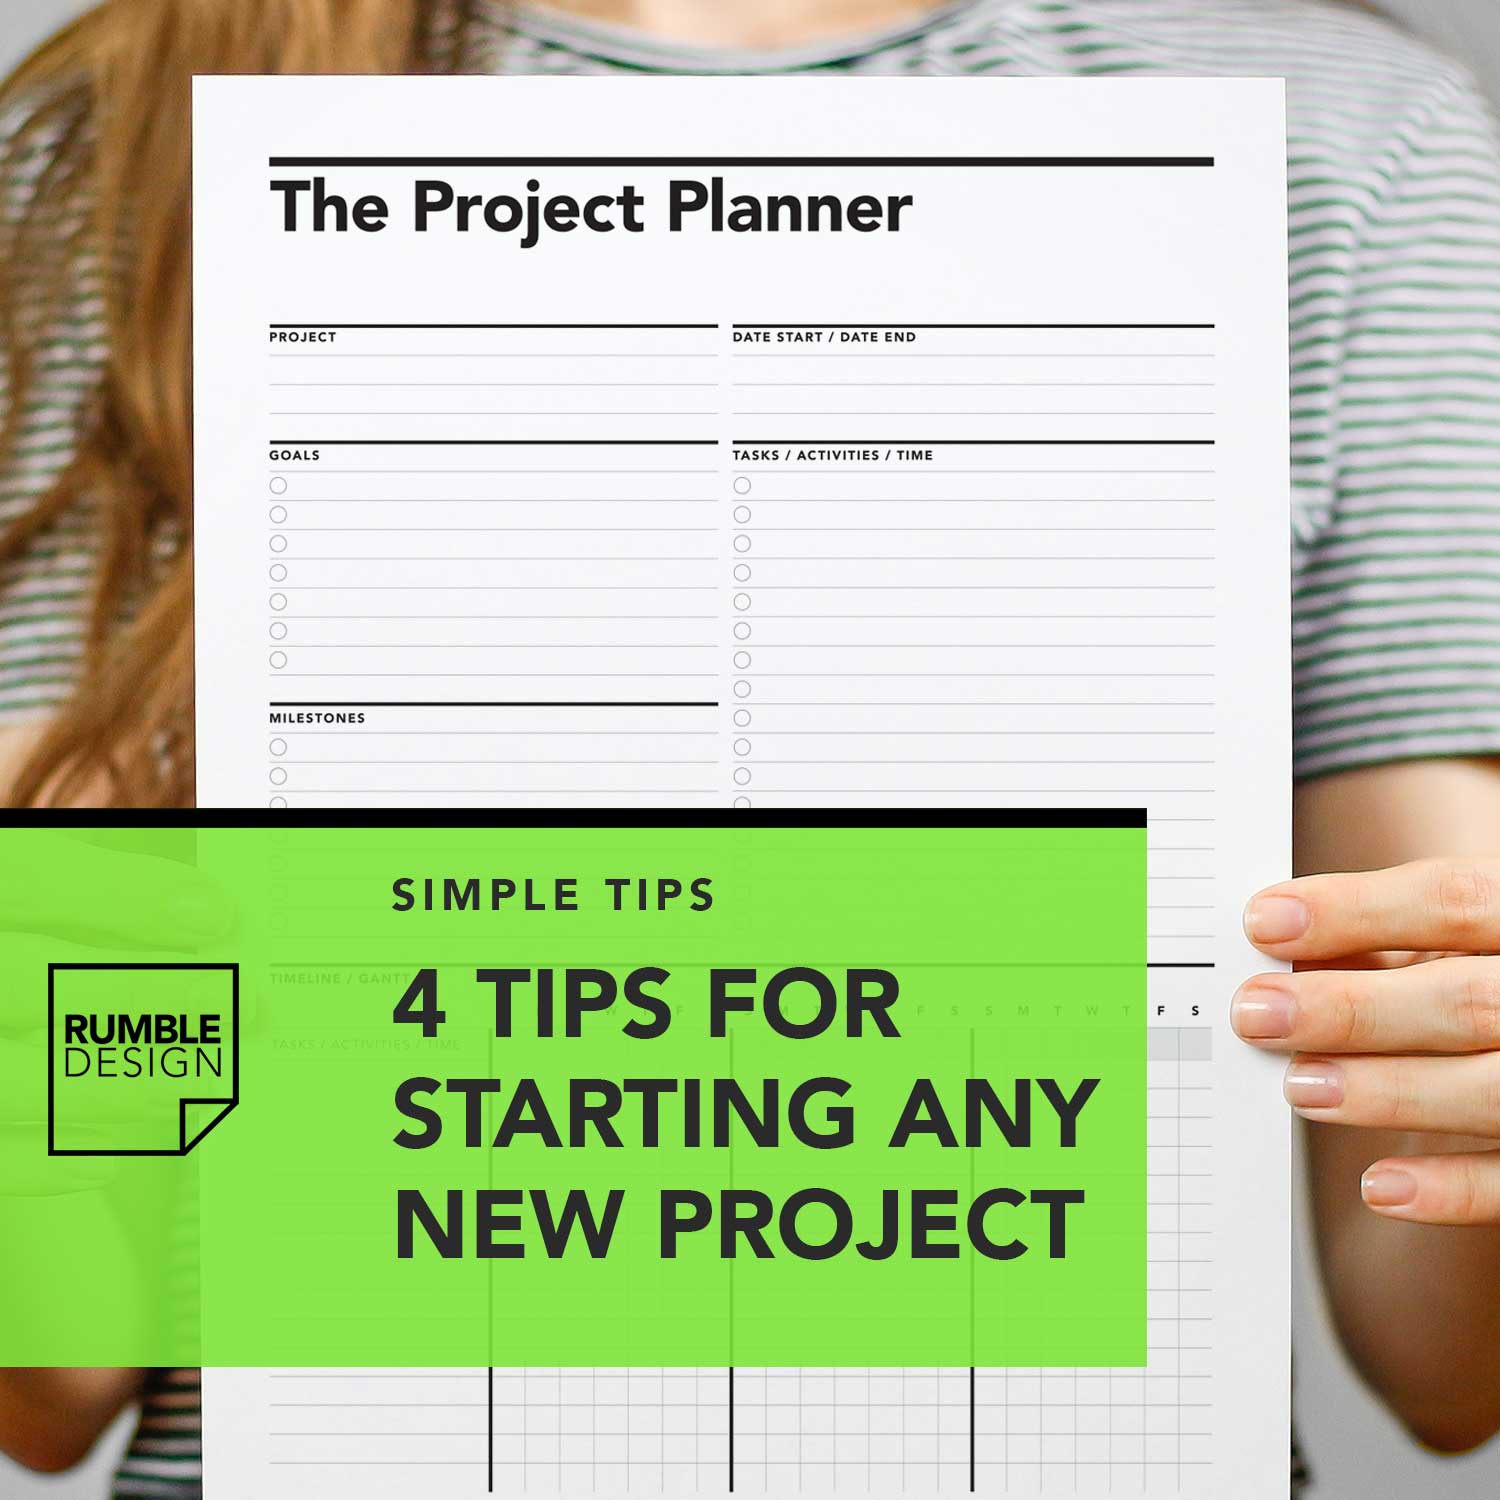 4 tips for starting any new project